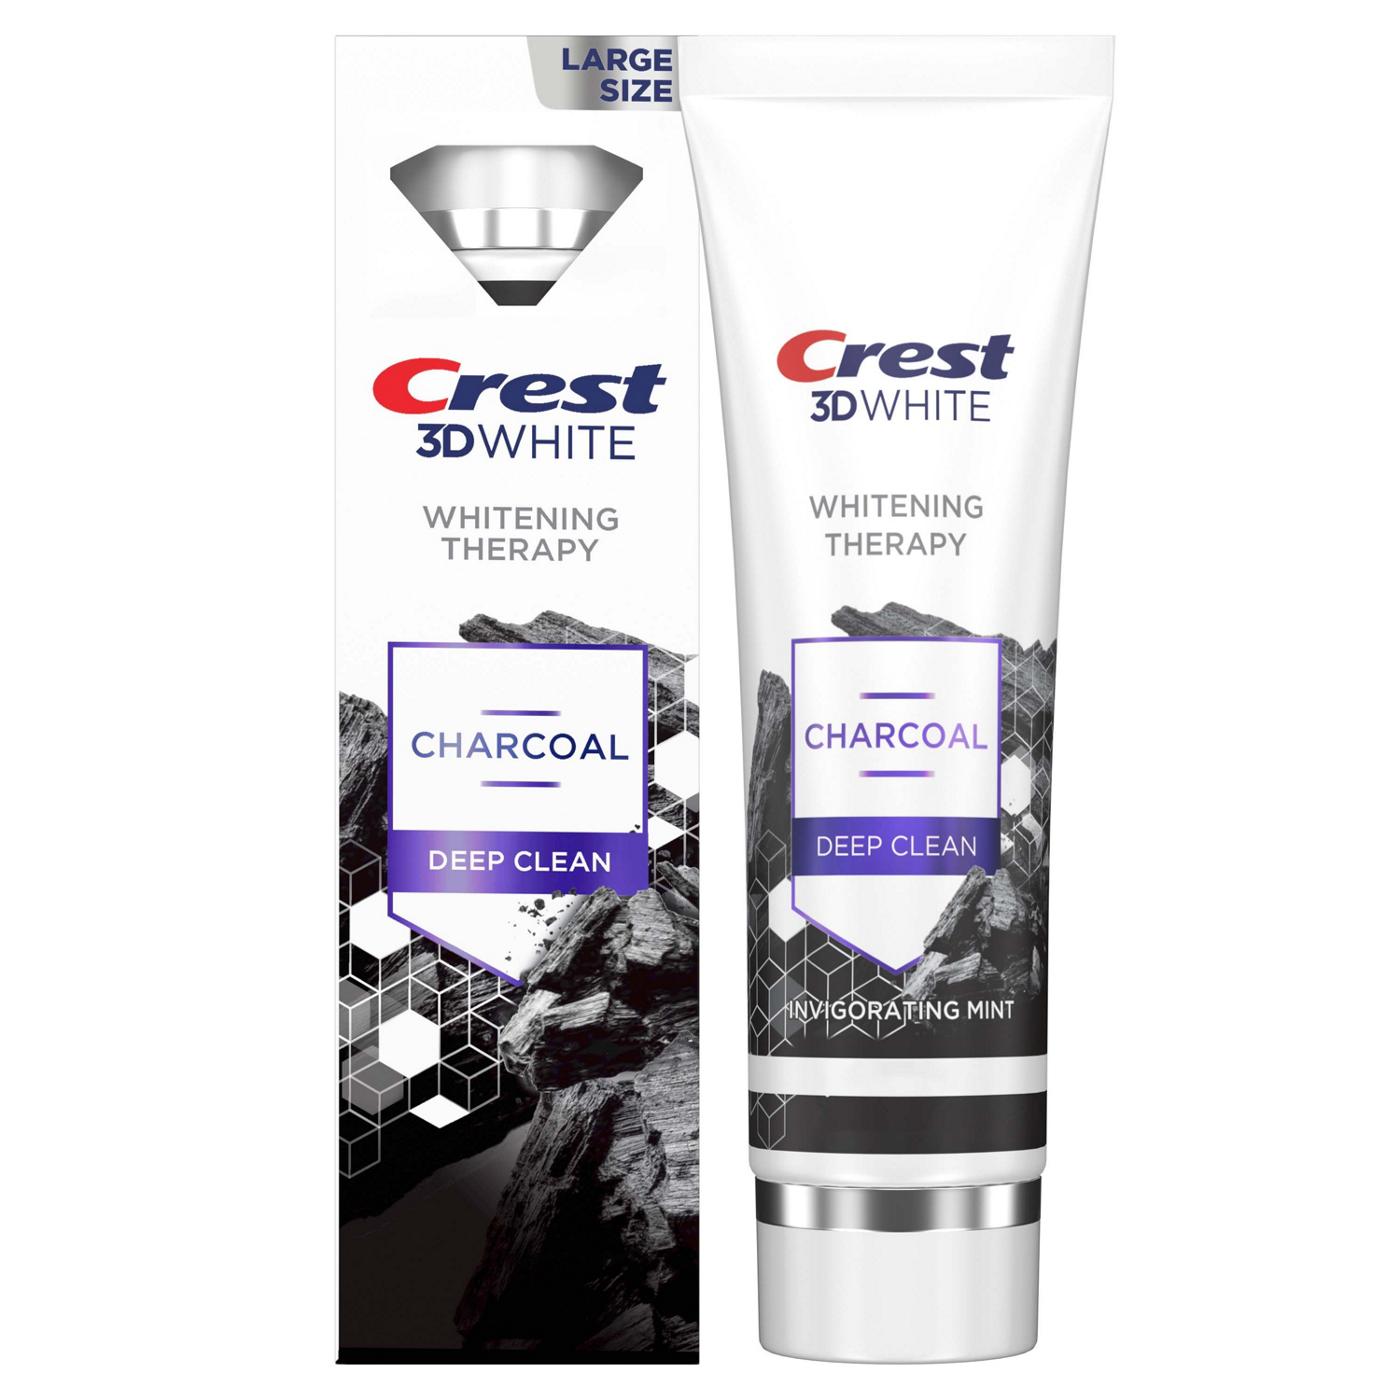 Crest 3D White Whitening Therapy Charcoal Toothpaste - Deep Clean; image 7 of 8